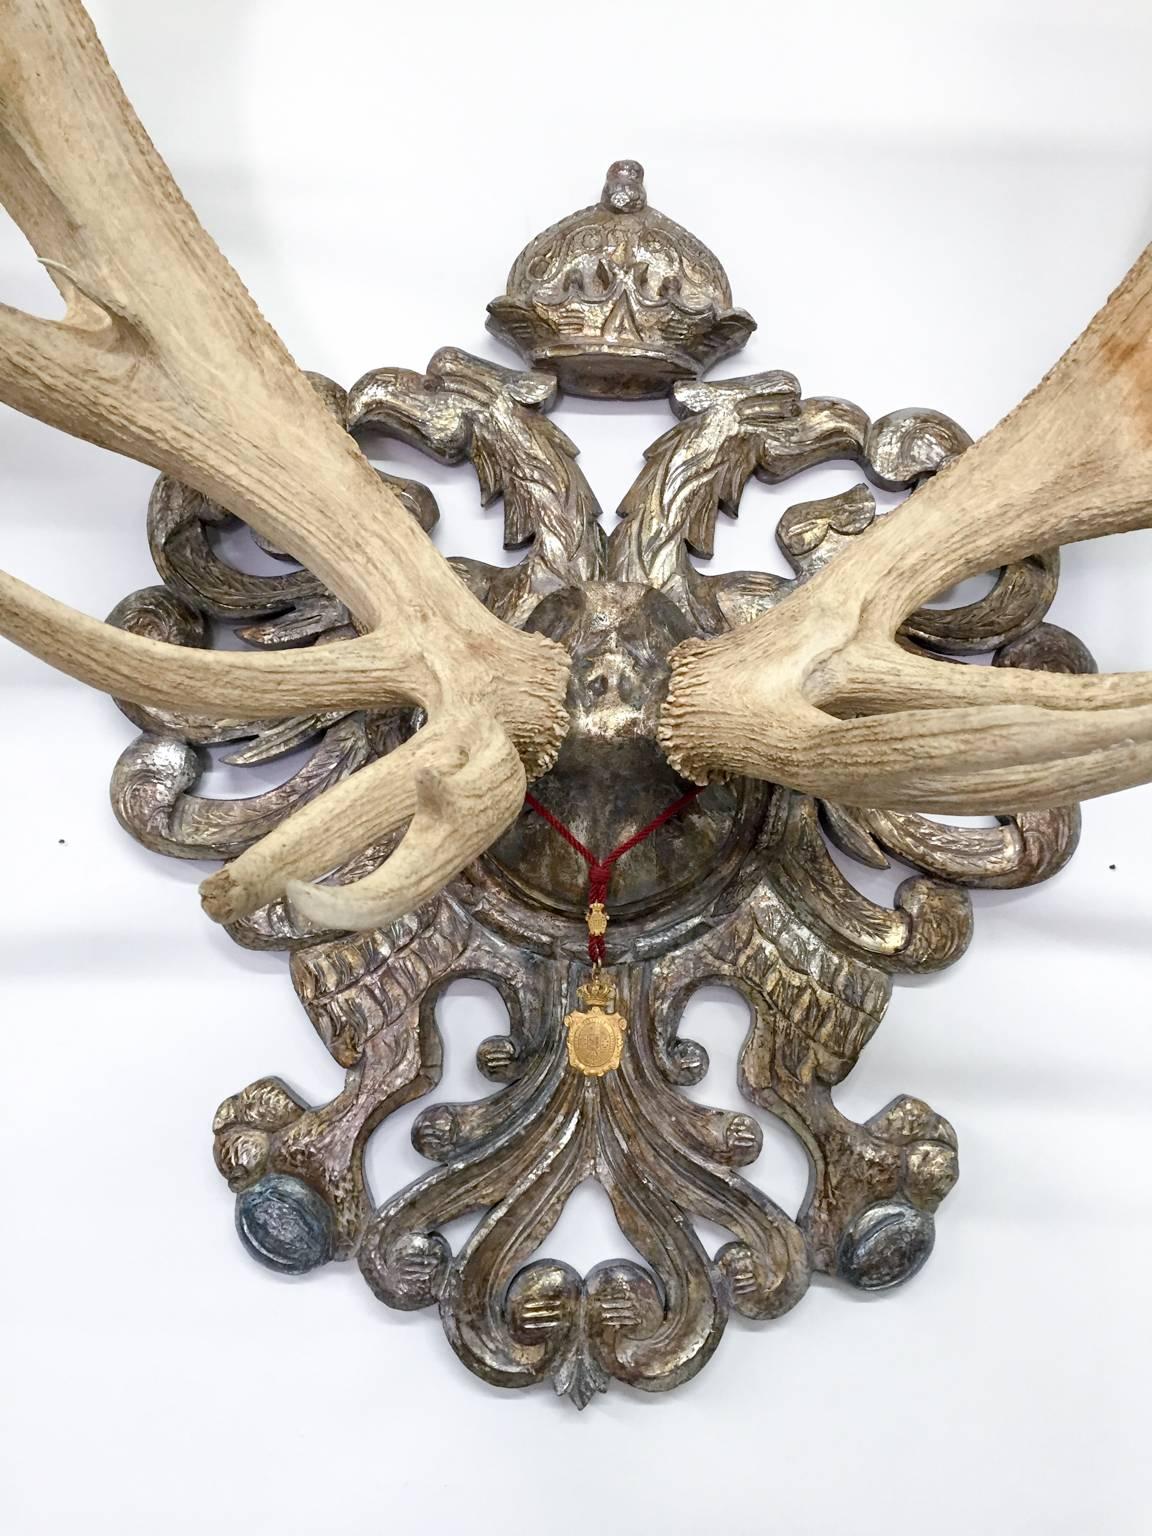 Black Forest 19th Century Habsburg Red Stag Trophy from Franz Joseph's Castle at Eckartsau